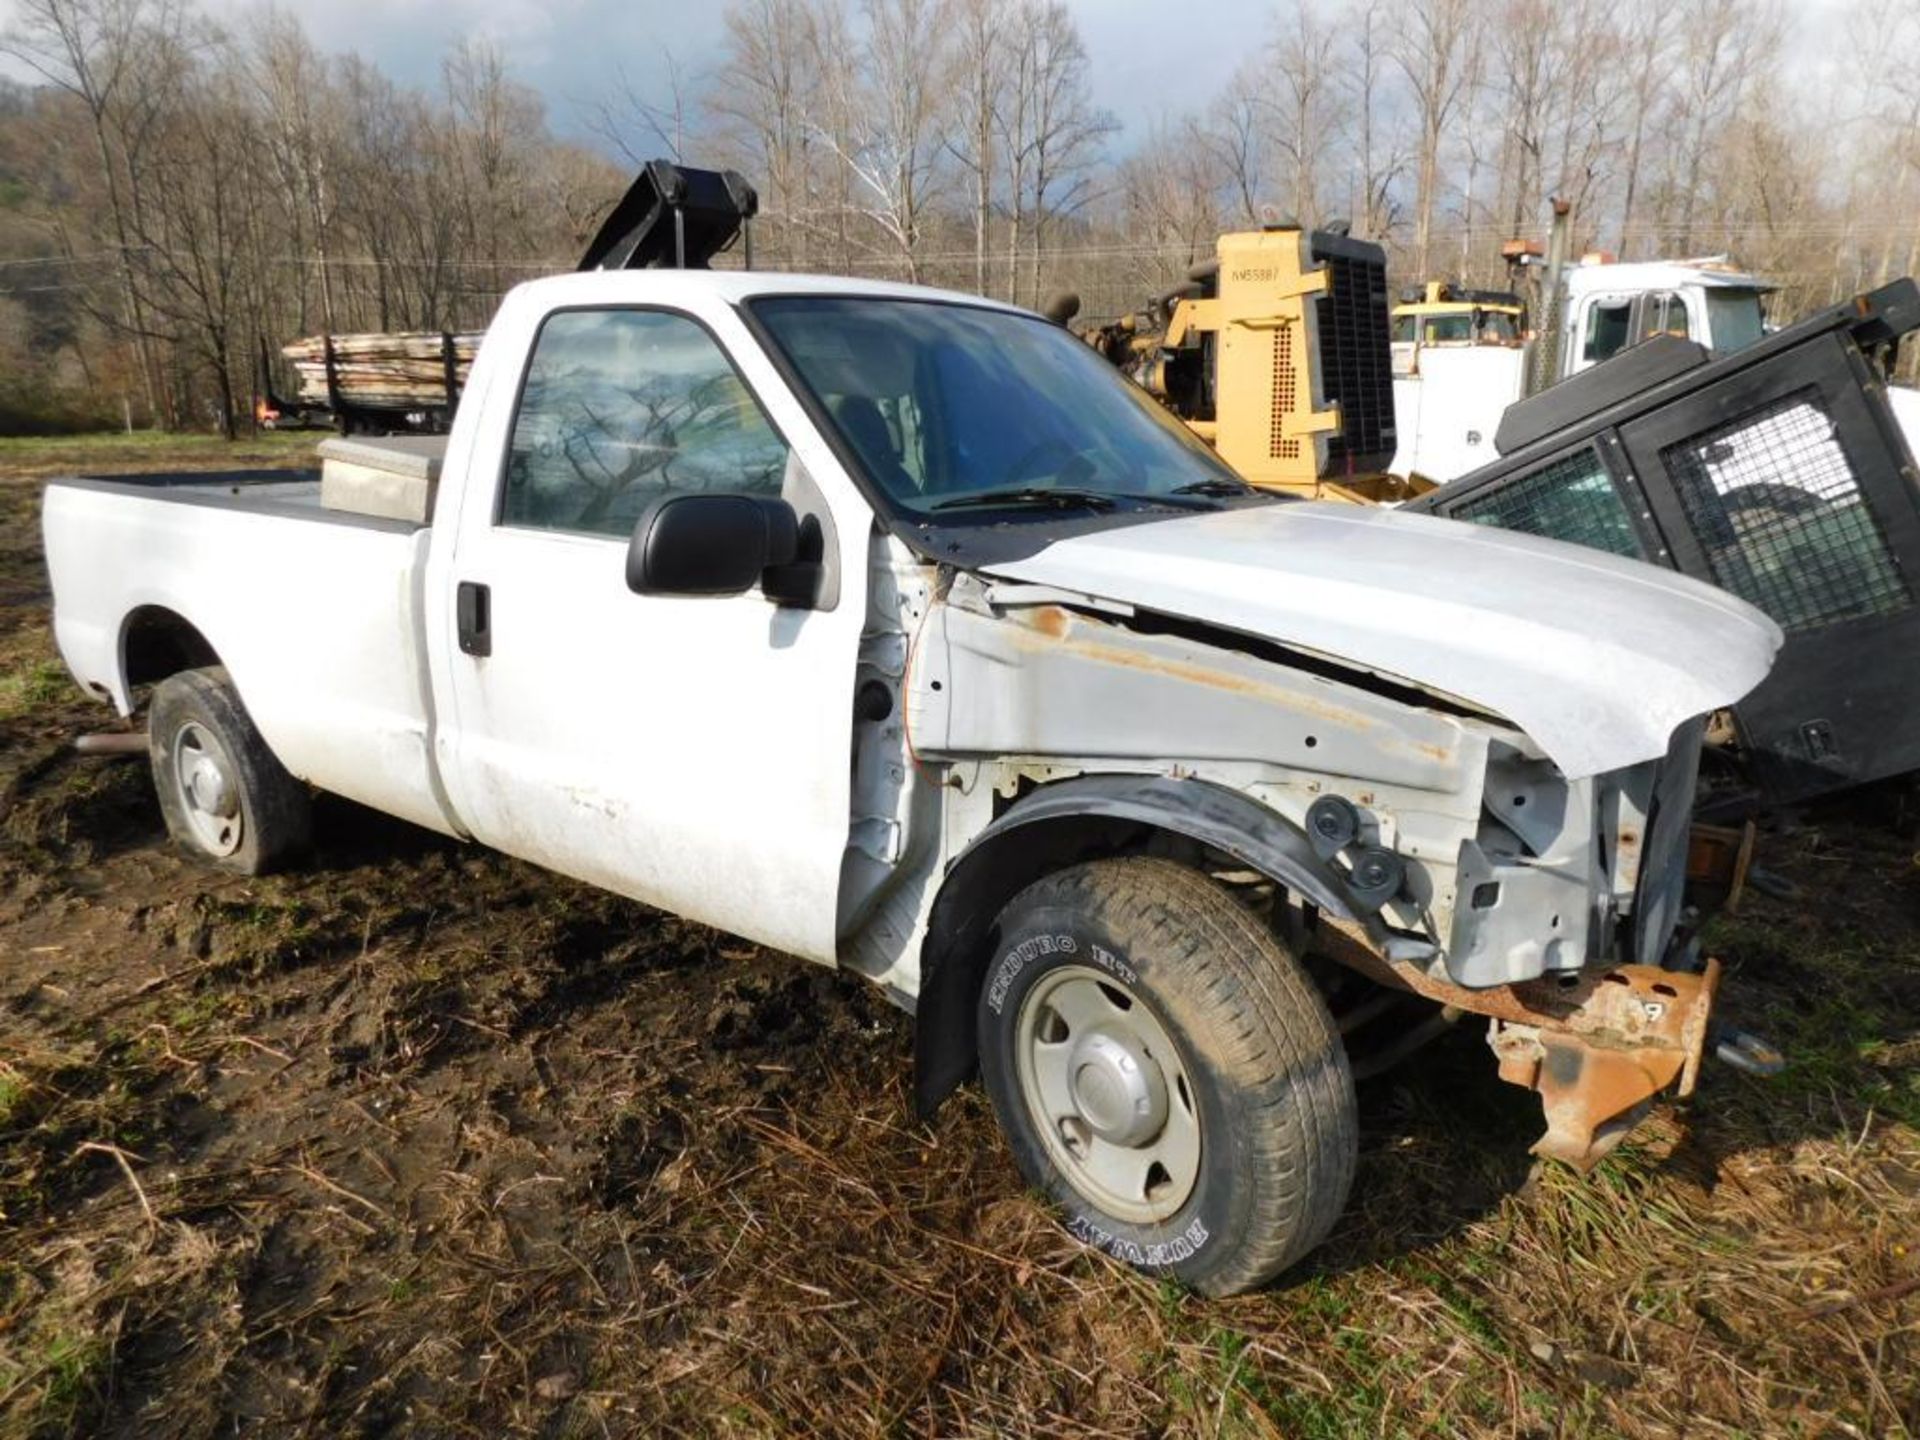 2005 Ford F250 Super-Duty, VIN 1FTNF20545EA68999, (AS, IS) - Image 2 of 6